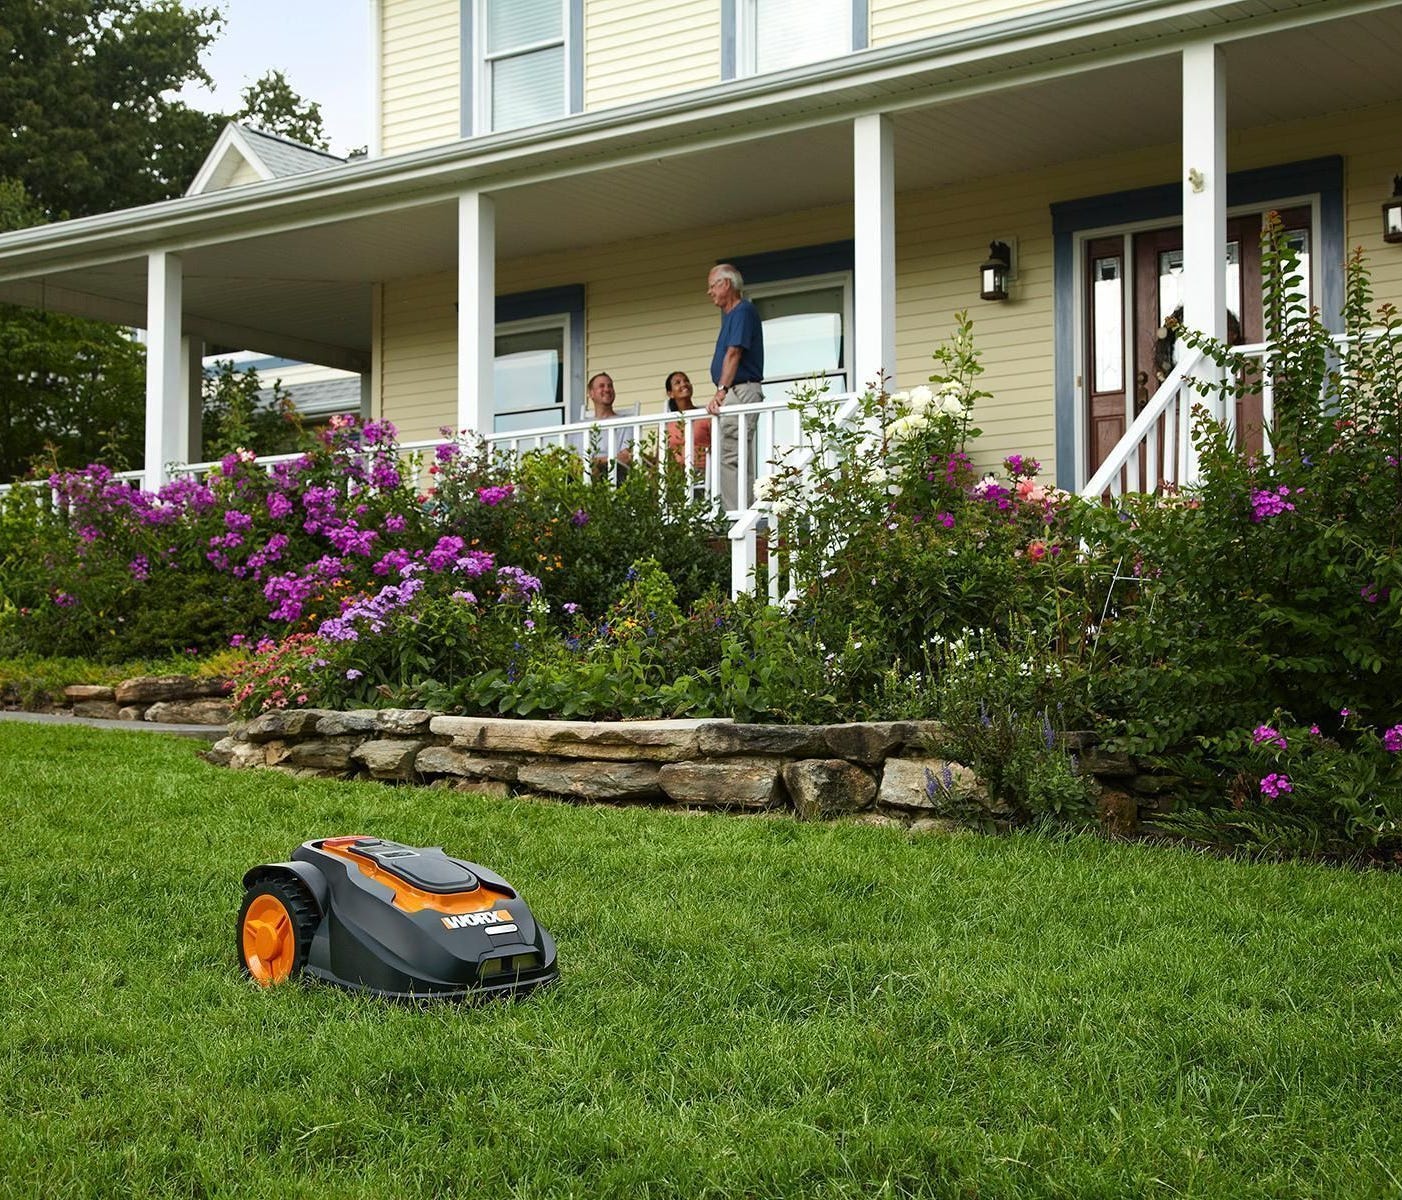 10 gadgets that will do gardening and yard work for you